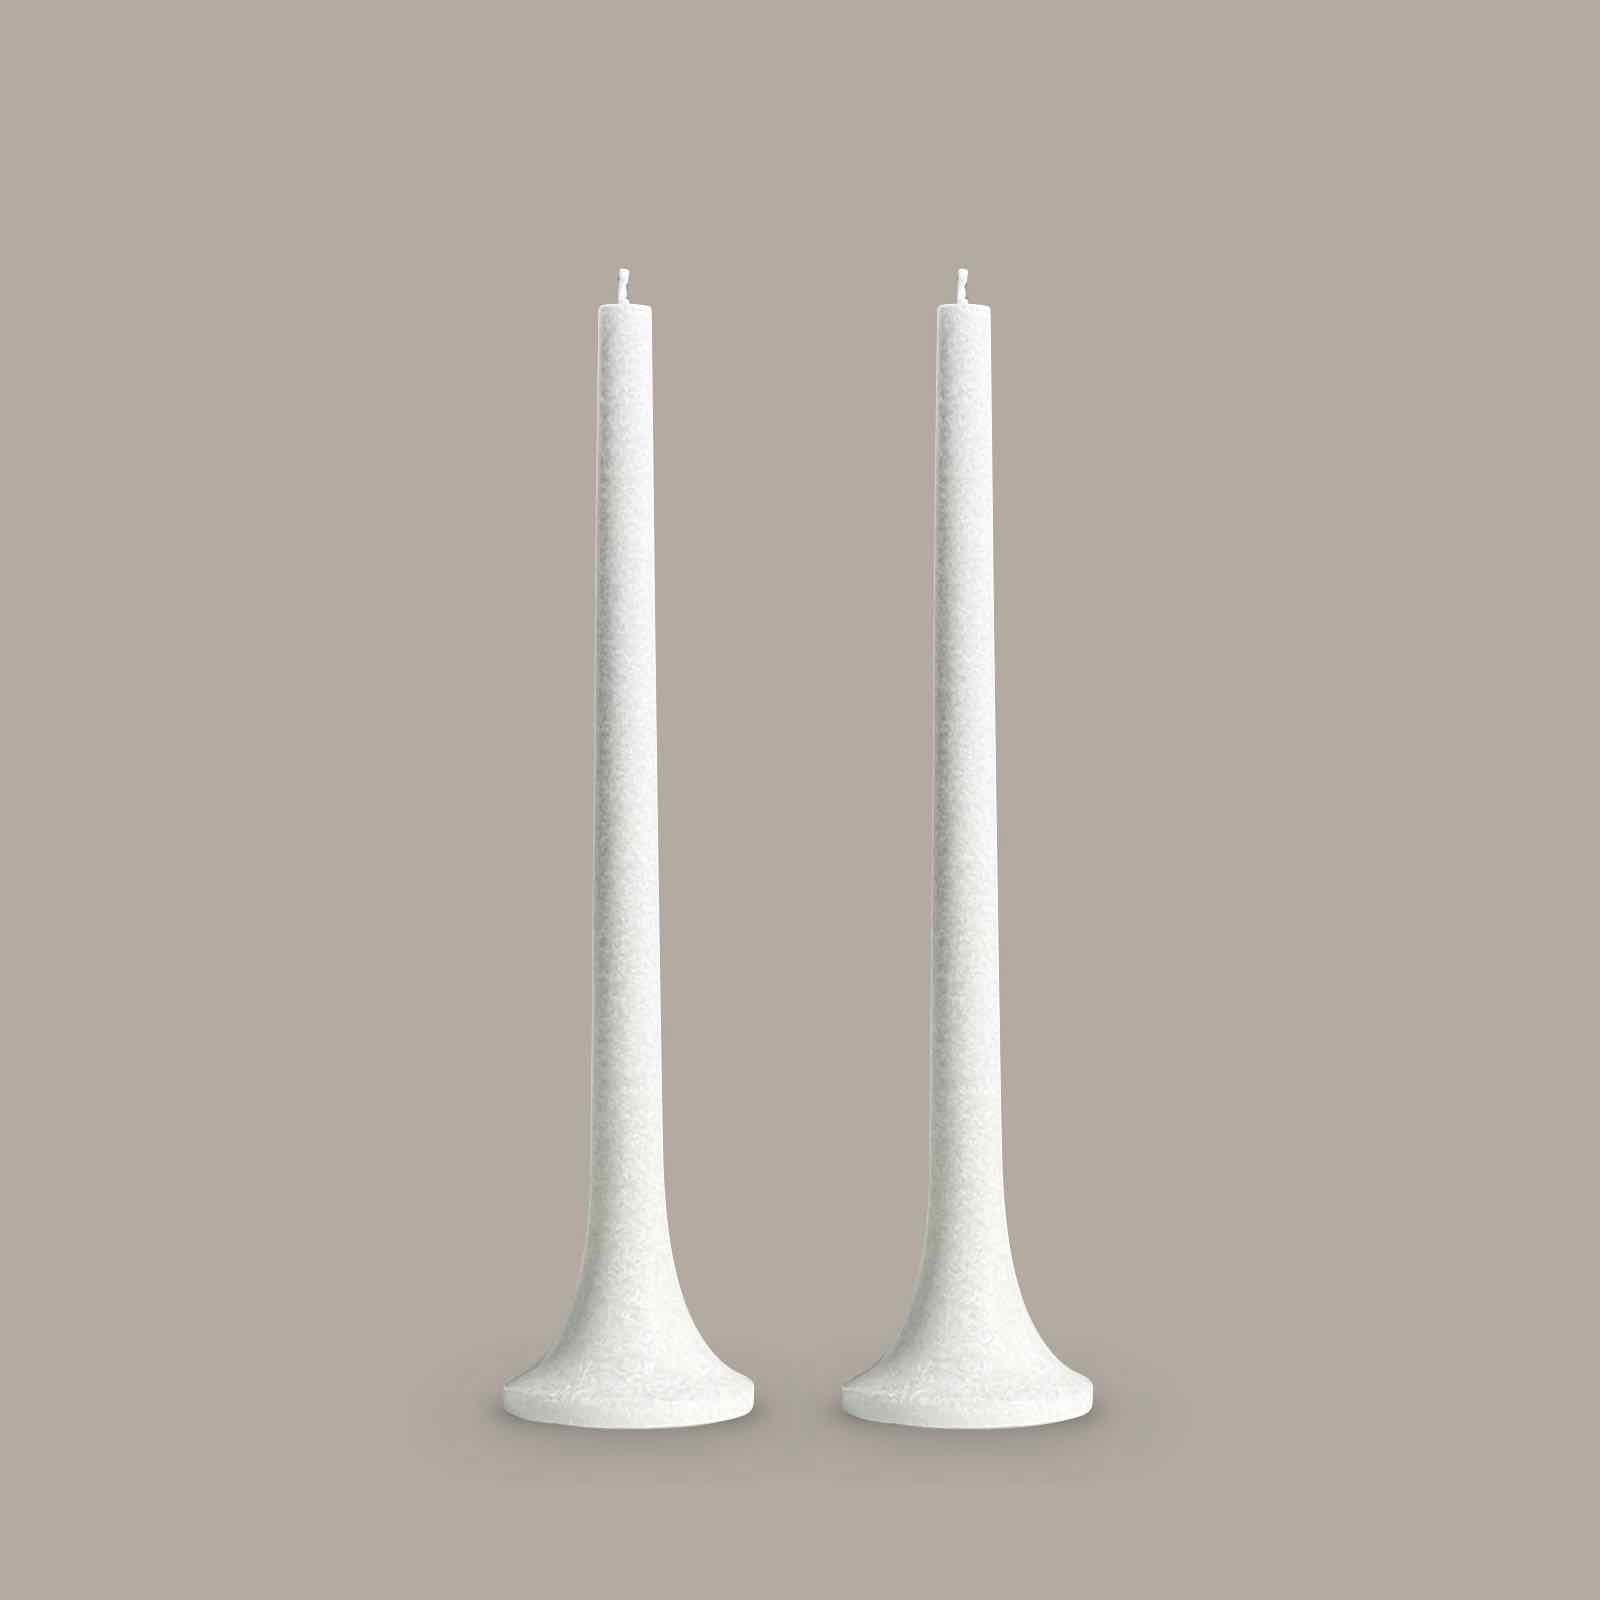 Elegant tall taper candles in nordic white